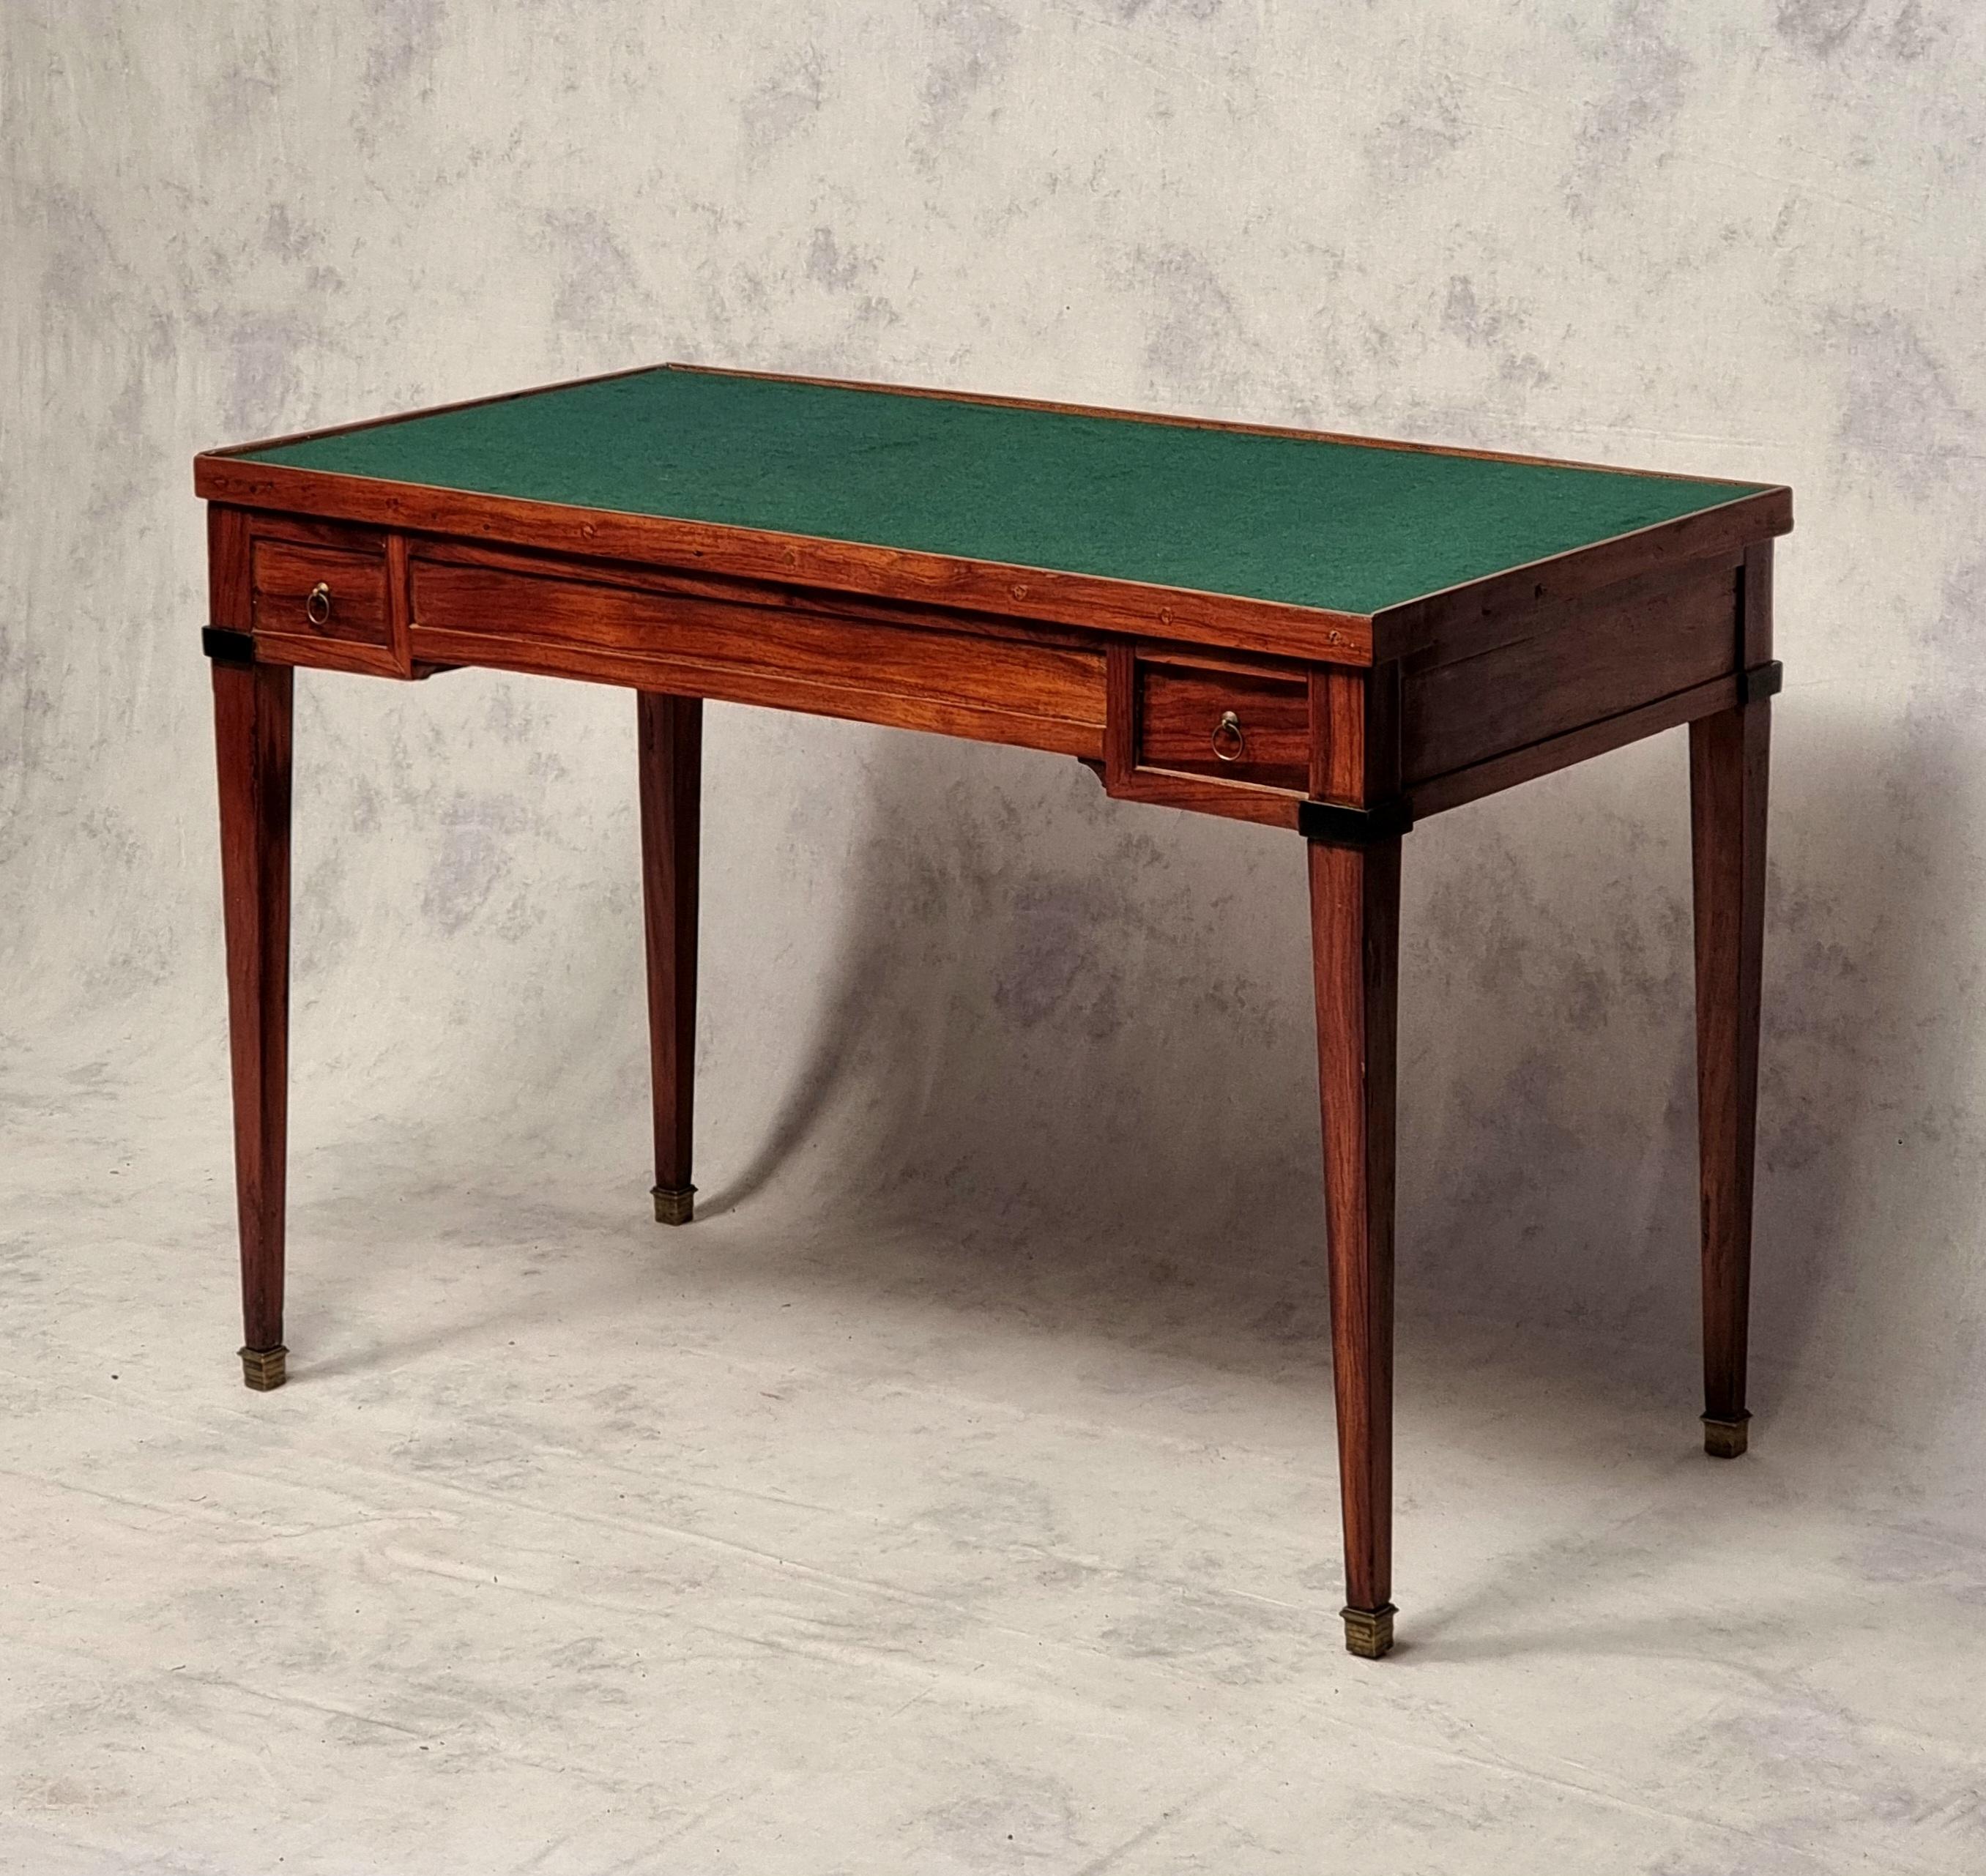 French Directoire Period Games Table - Rosewood & Ebony - 18th For Sale